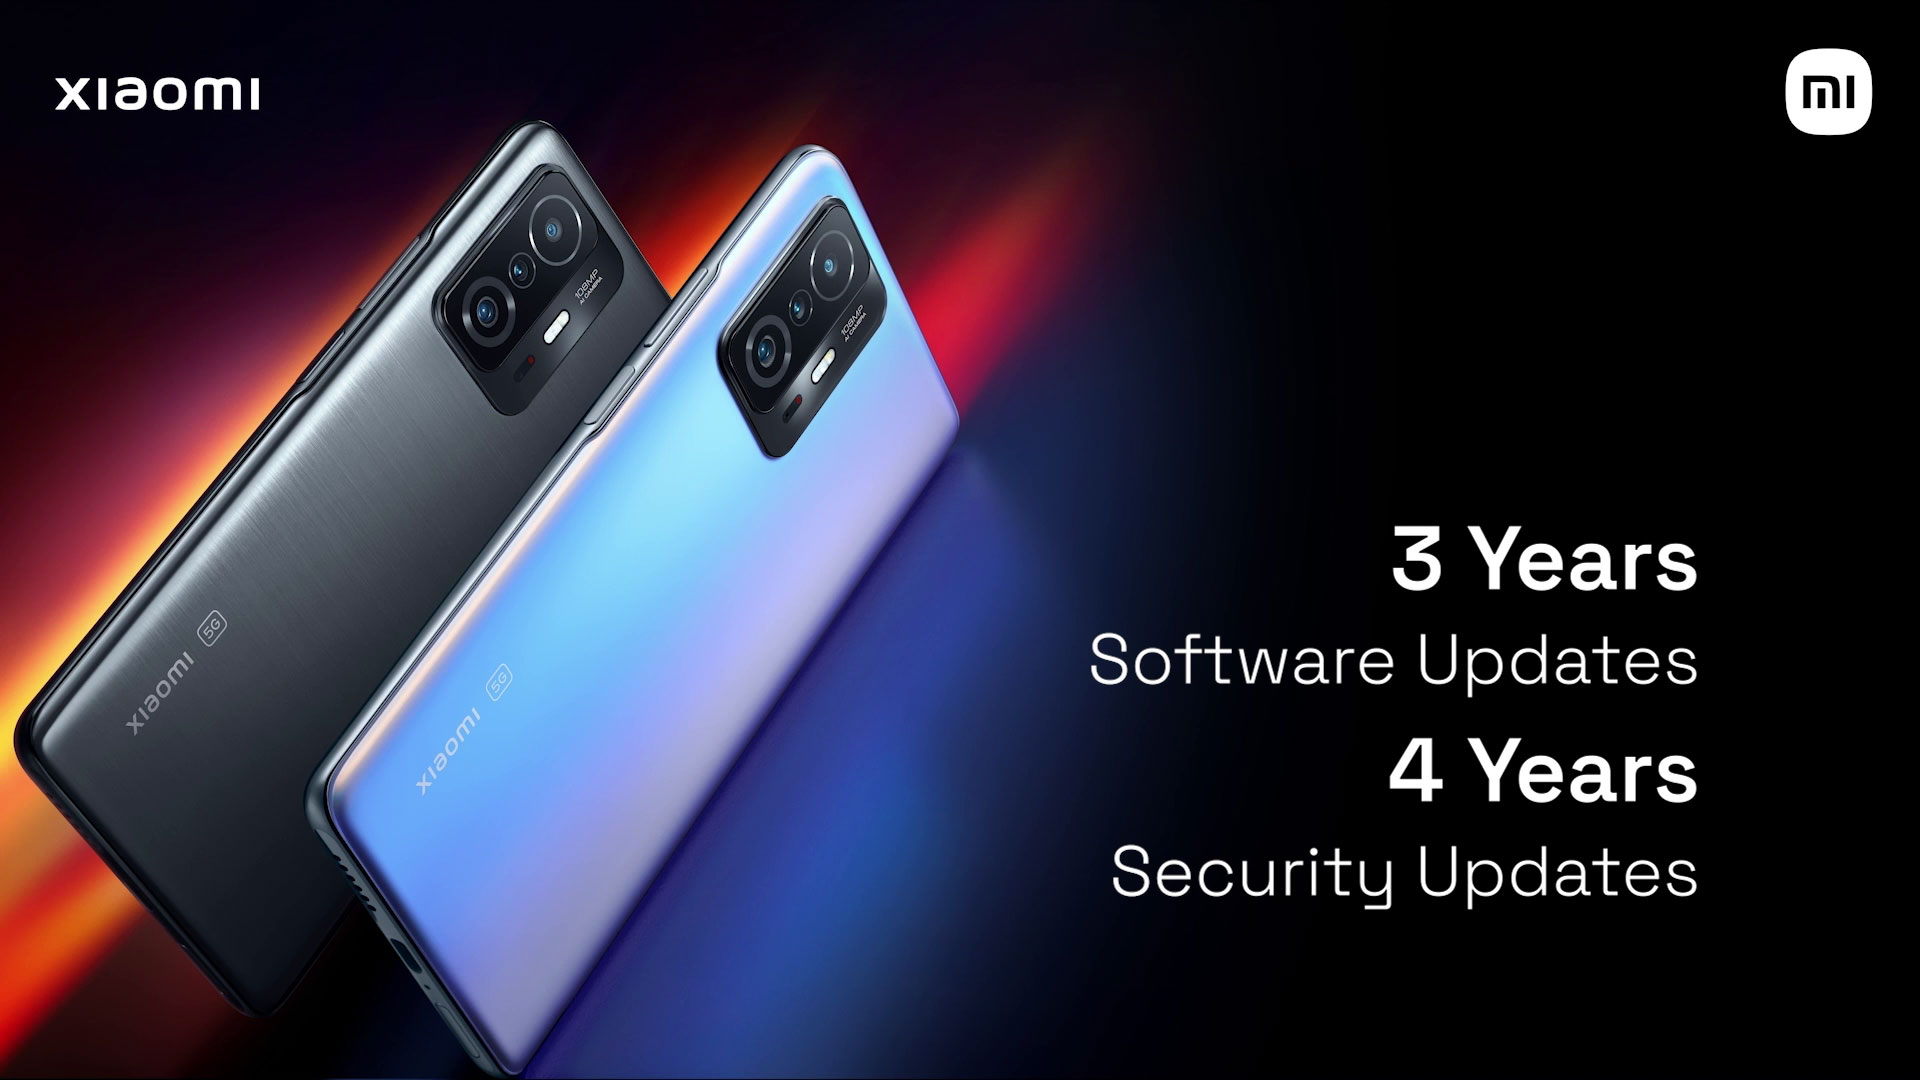 Xiaomi 11T Unswerving launches in India, starting at INR 34,999 (~US$470)